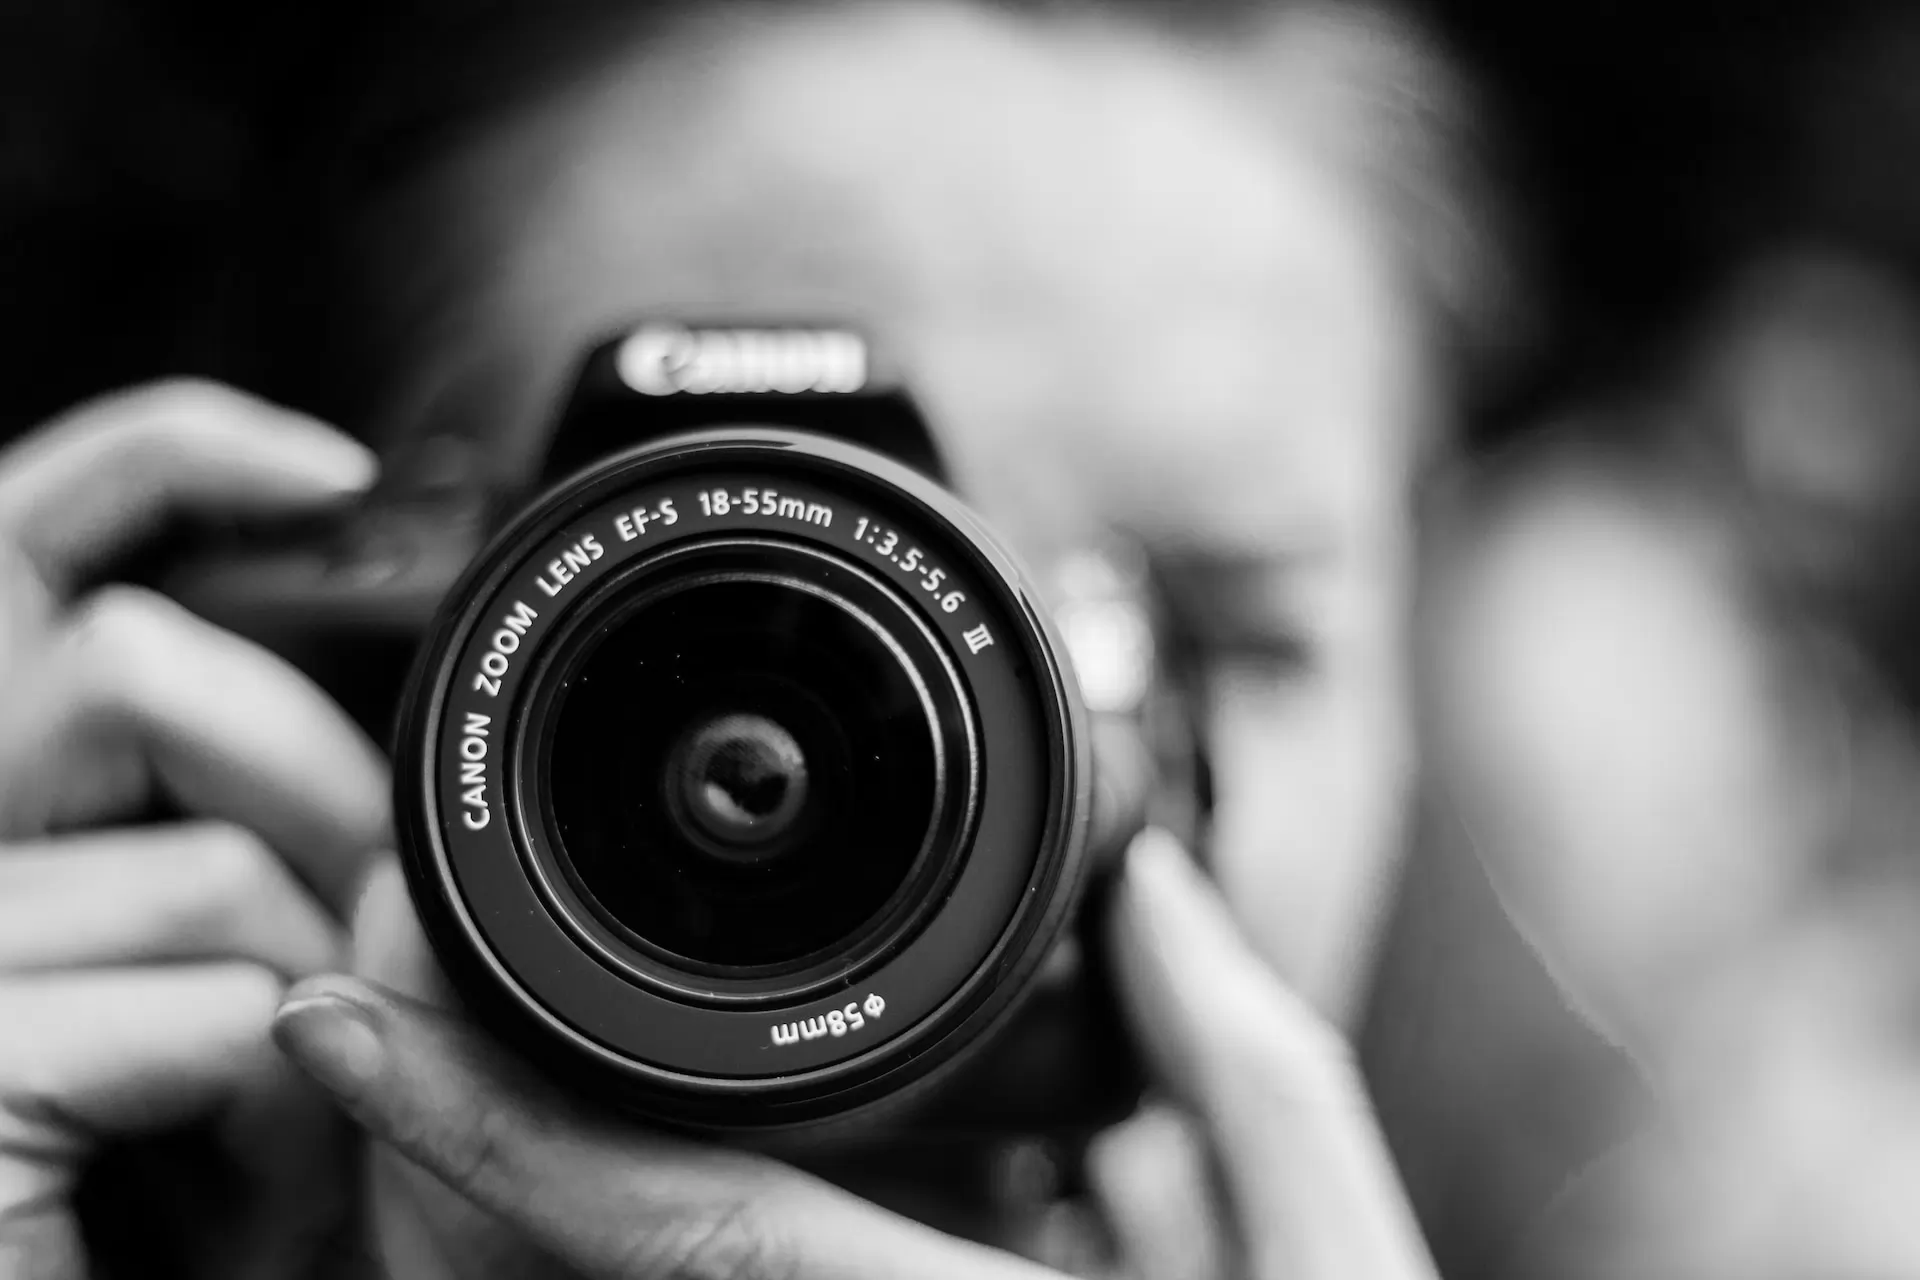 The market for professional photographers